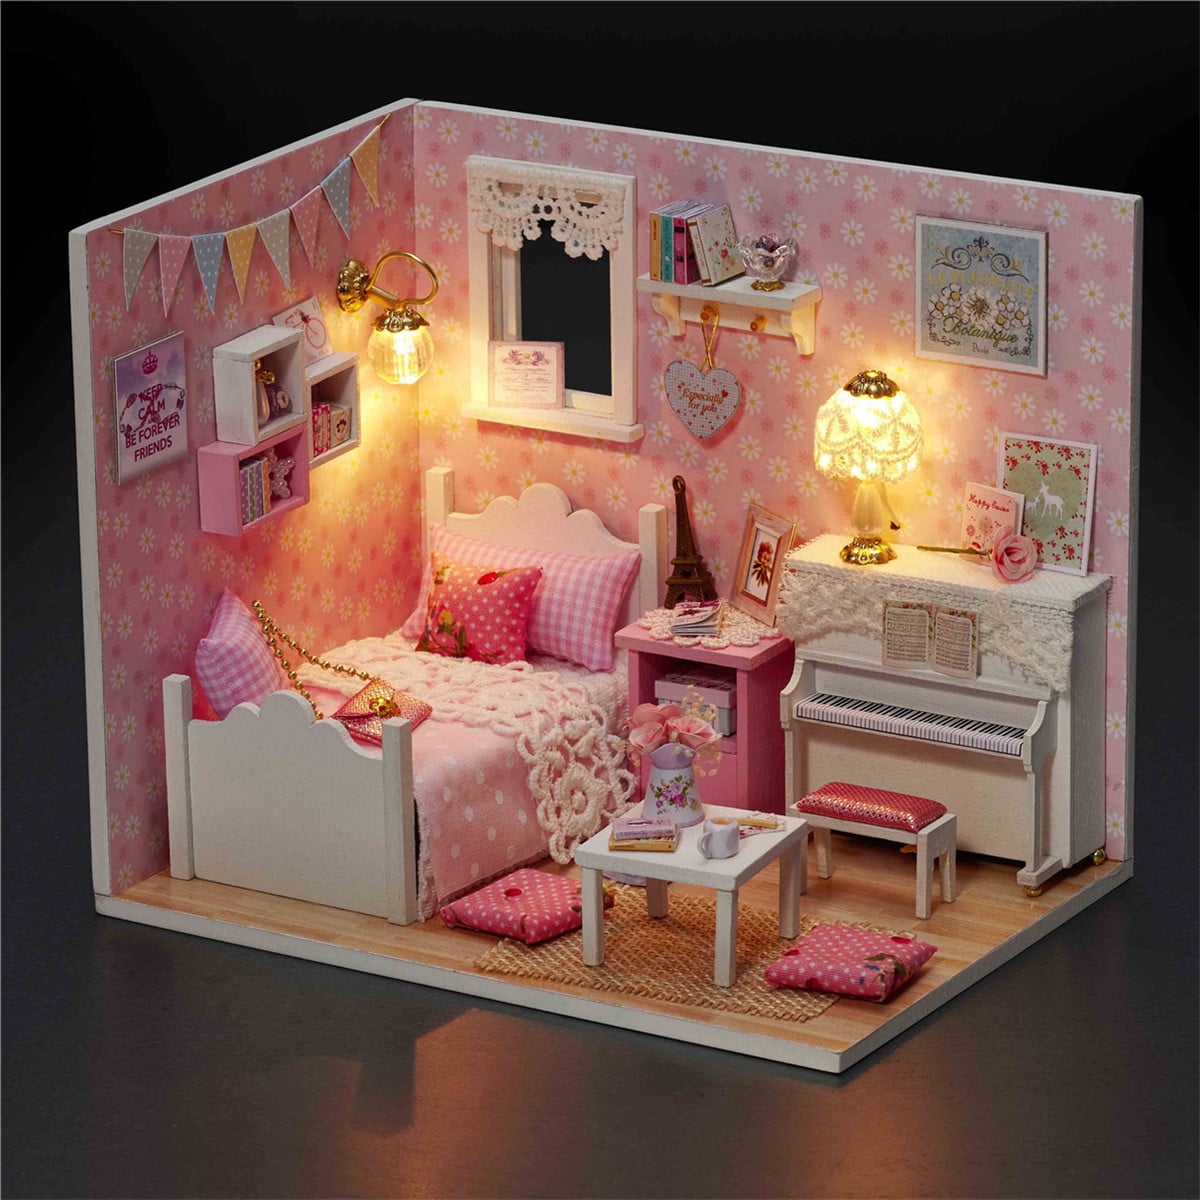 Details about   DIY Miniature Dollhouse Furniture Model Kits Wooden Doll House Kids Gift Toy 